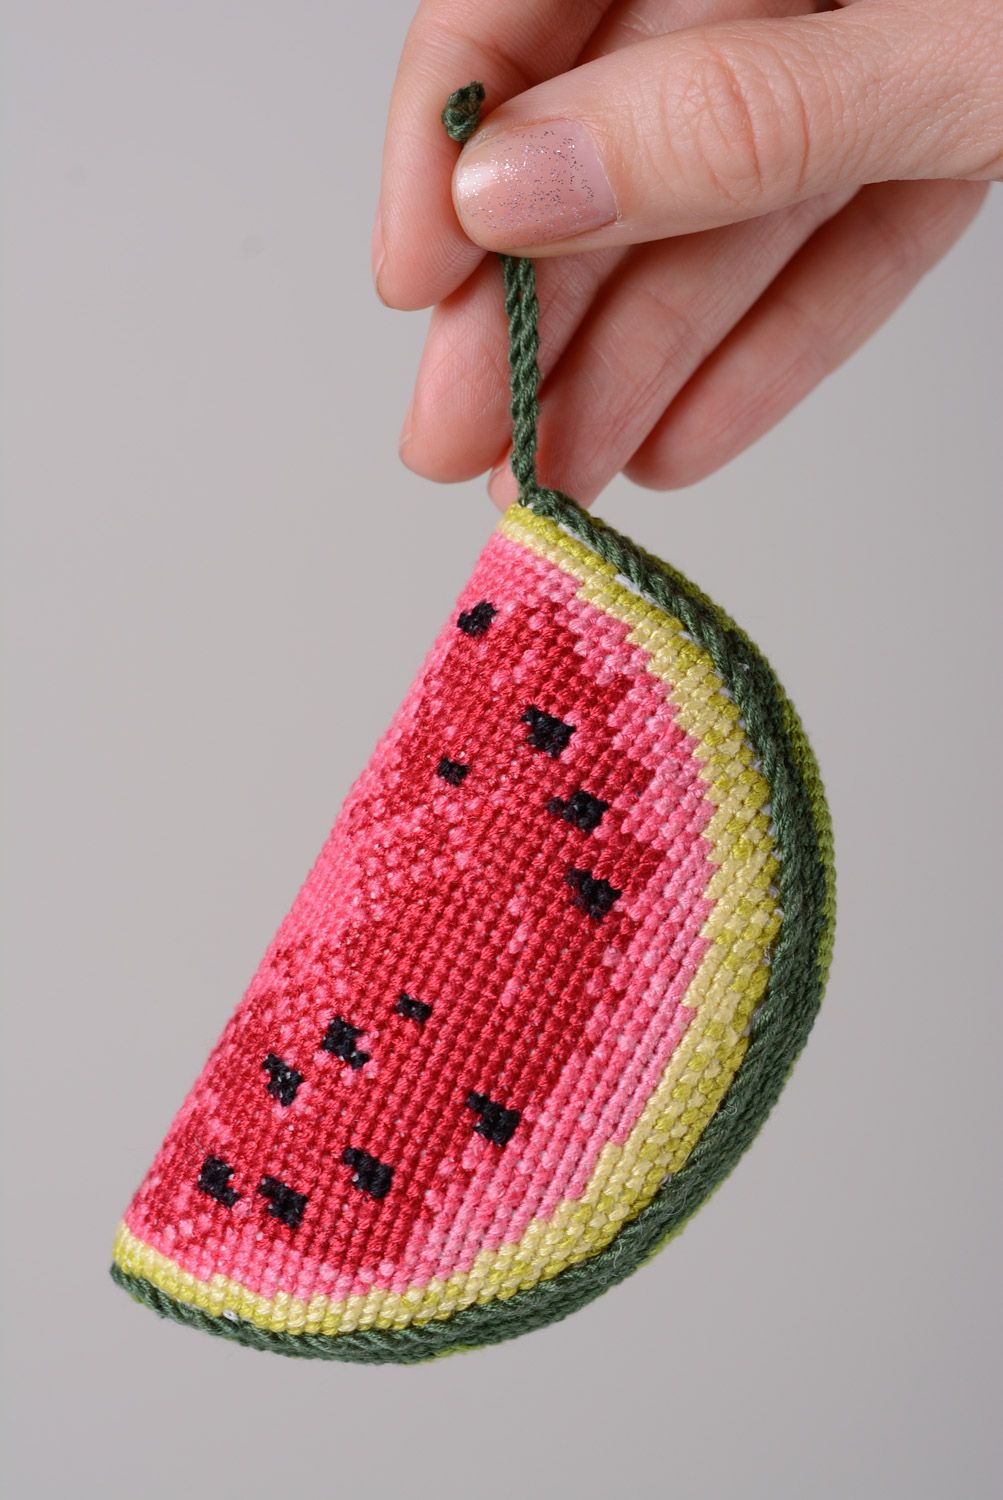 Handmade cross stitched soft pincushion in the shape of water-melon slice  photo 5